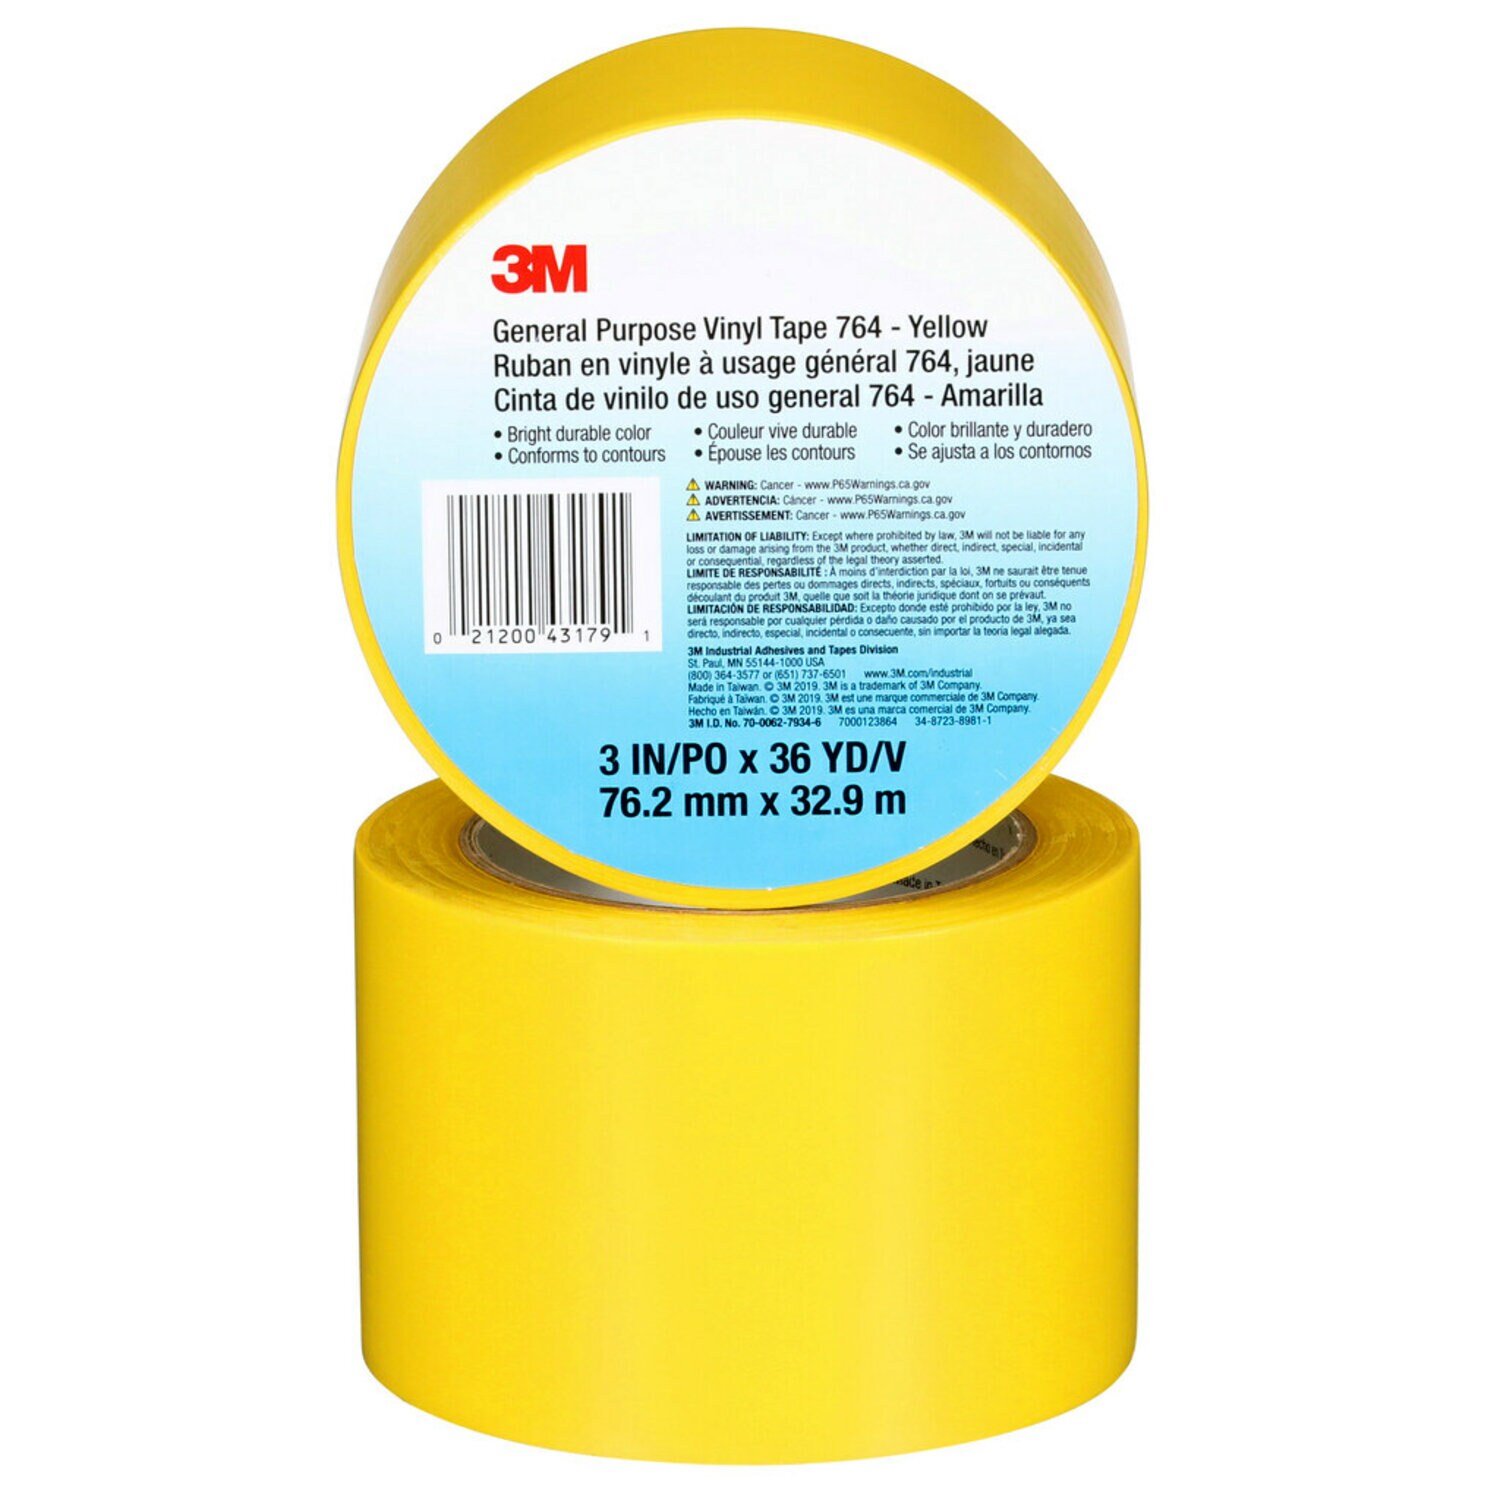 7000123864 - 3M General Purpose Vinyl Tape 764, Yellow, 3 in x 36 yd, 5 mil, 12 Roll/Case, Individually Wrapped Conveniently Packaged